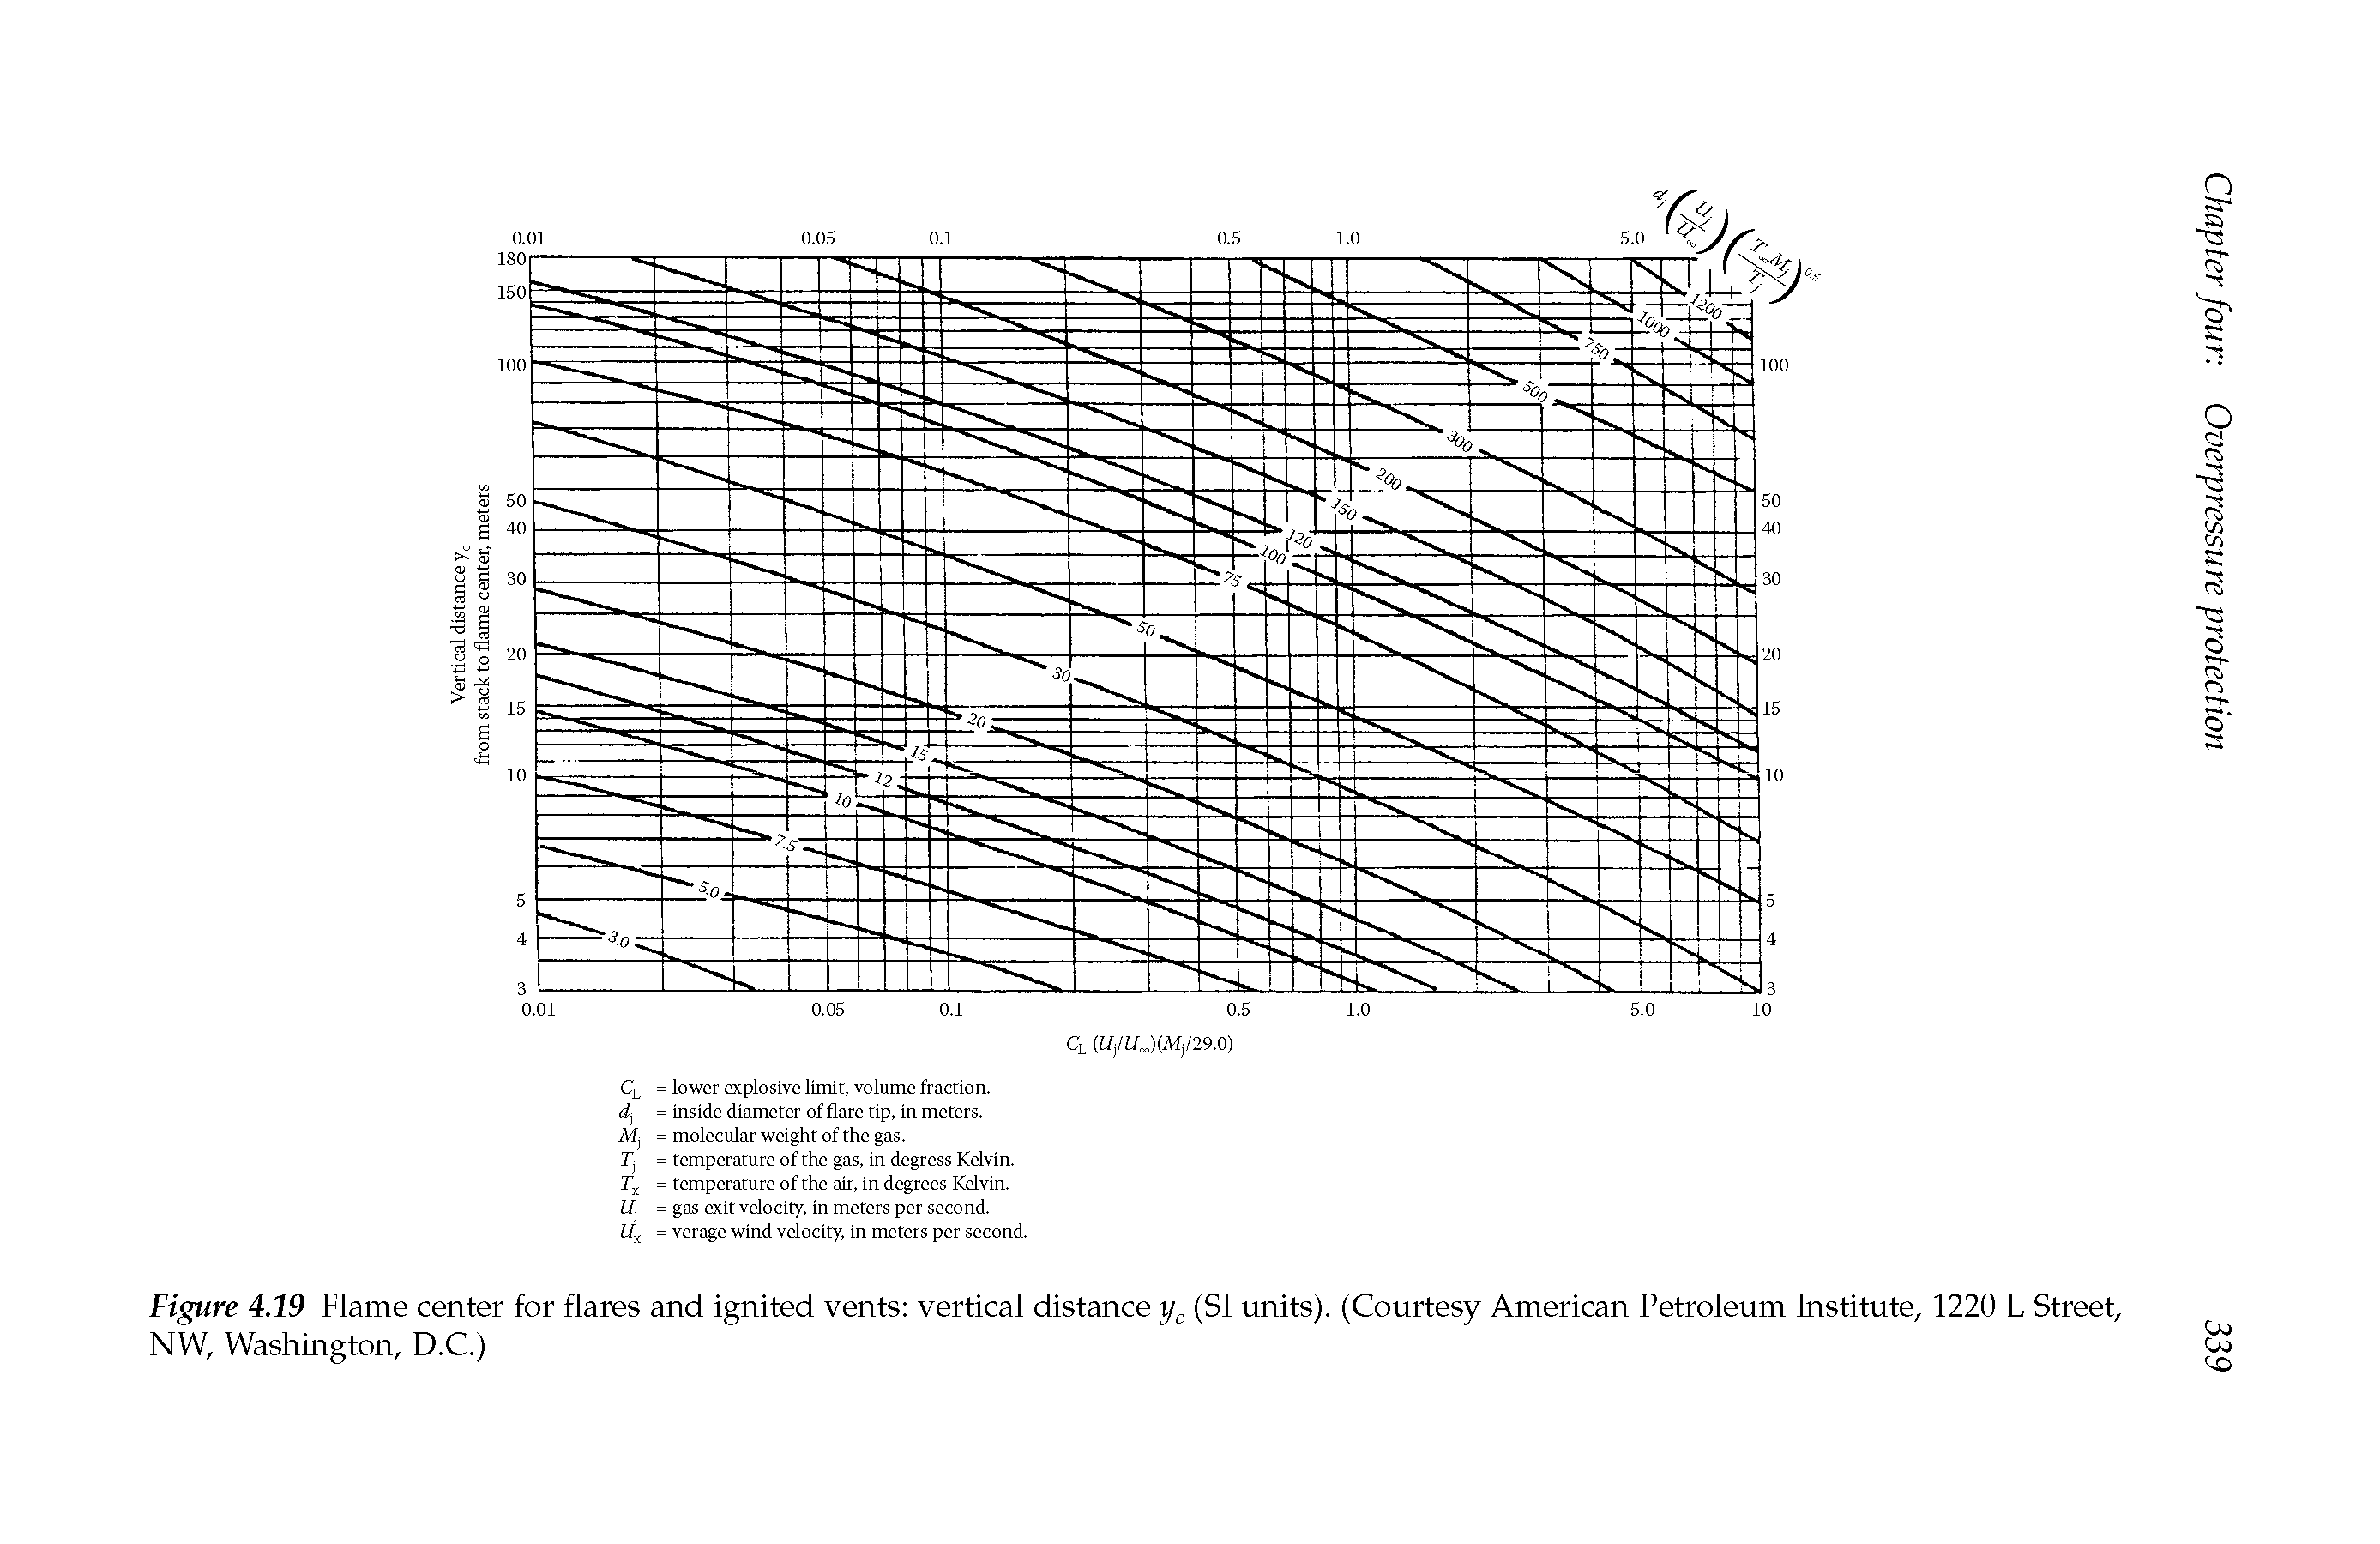 Figure 4.19 Flame center for flares and ignited vents vertical distance (SI units). (Courtesy American Petroleum Institute, 1220 L Street, NW, Washington, D.C.)...